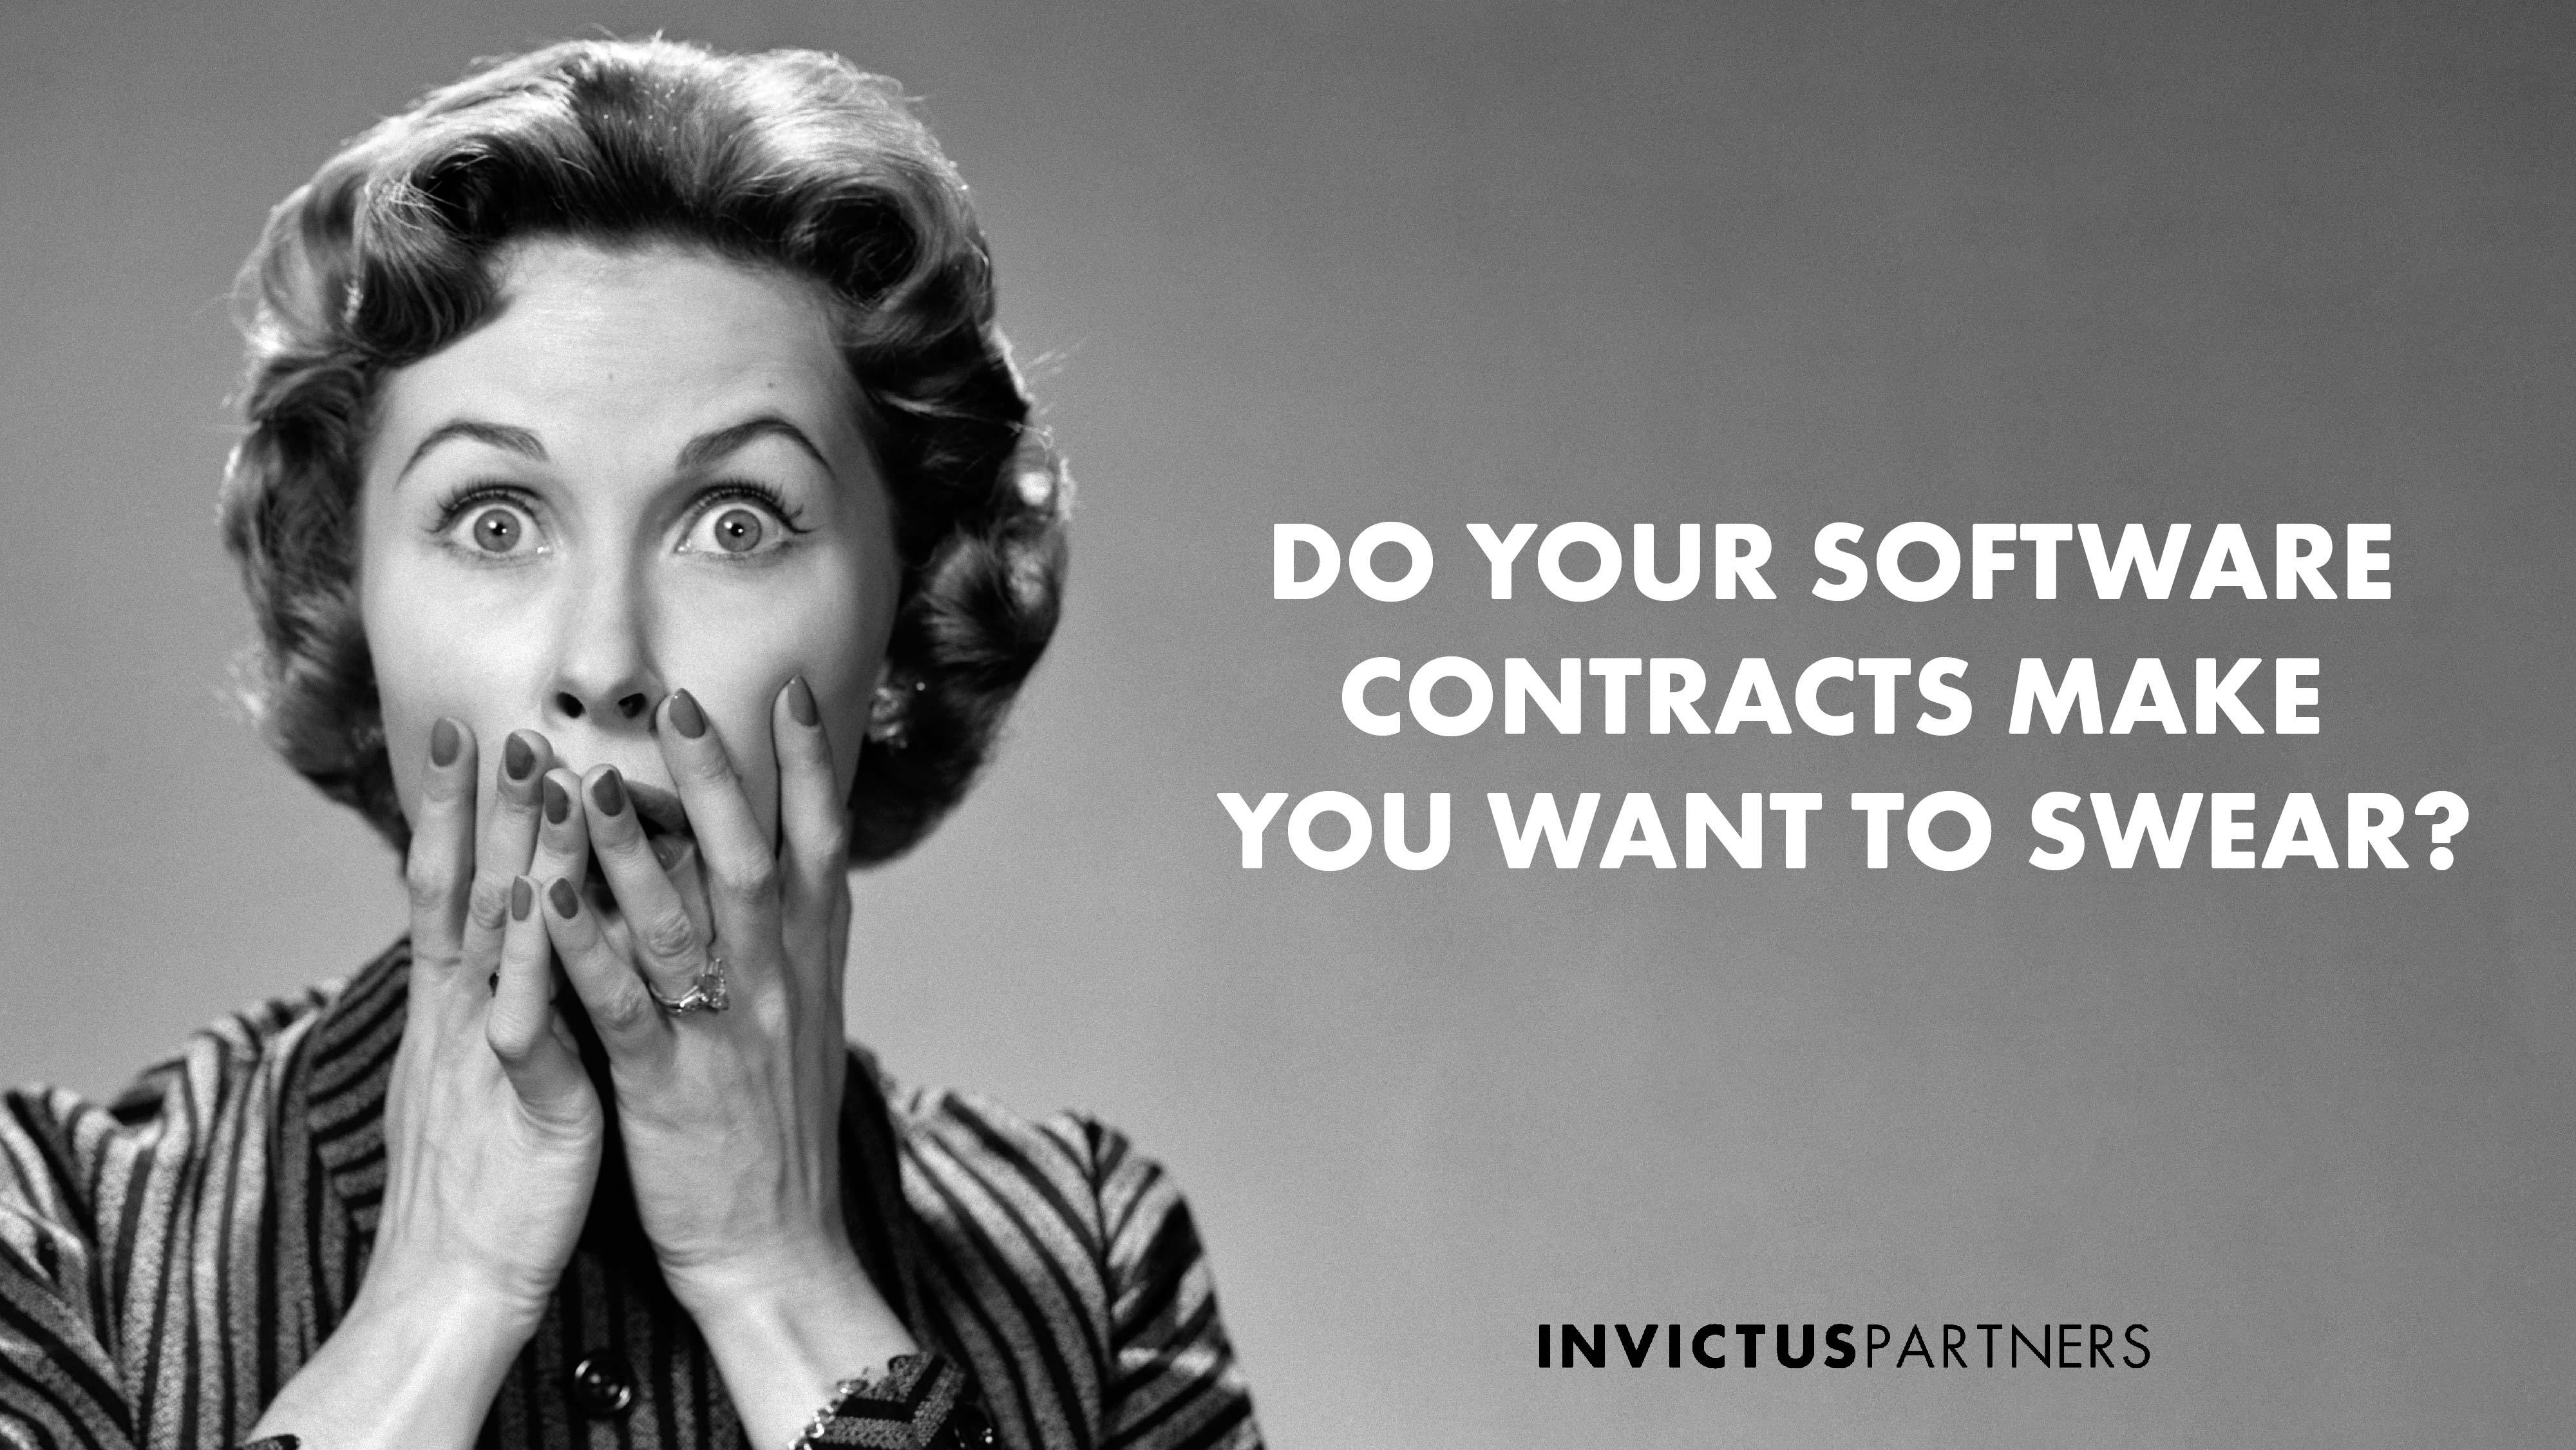 Do your software contracts make you want to swear?